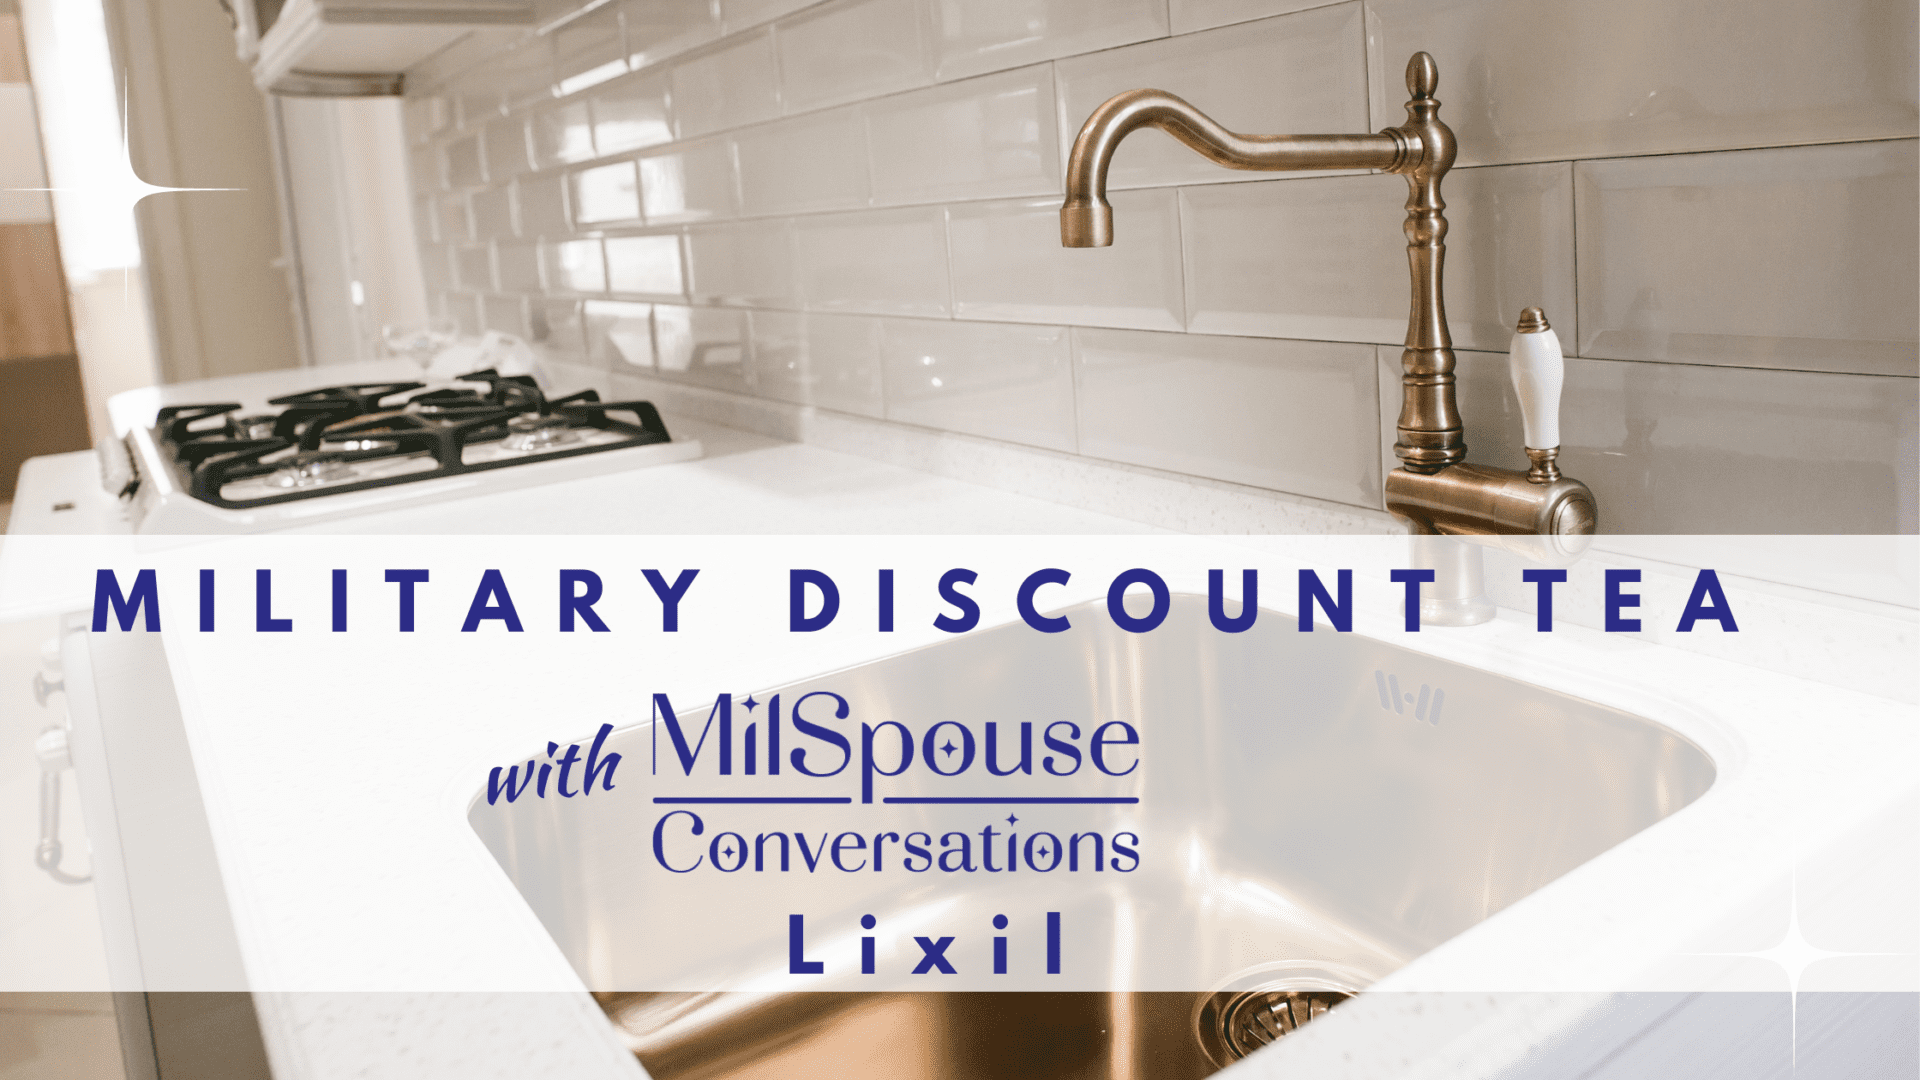 Save On High Quality Plumbing Products with the LIXIL Military Discount